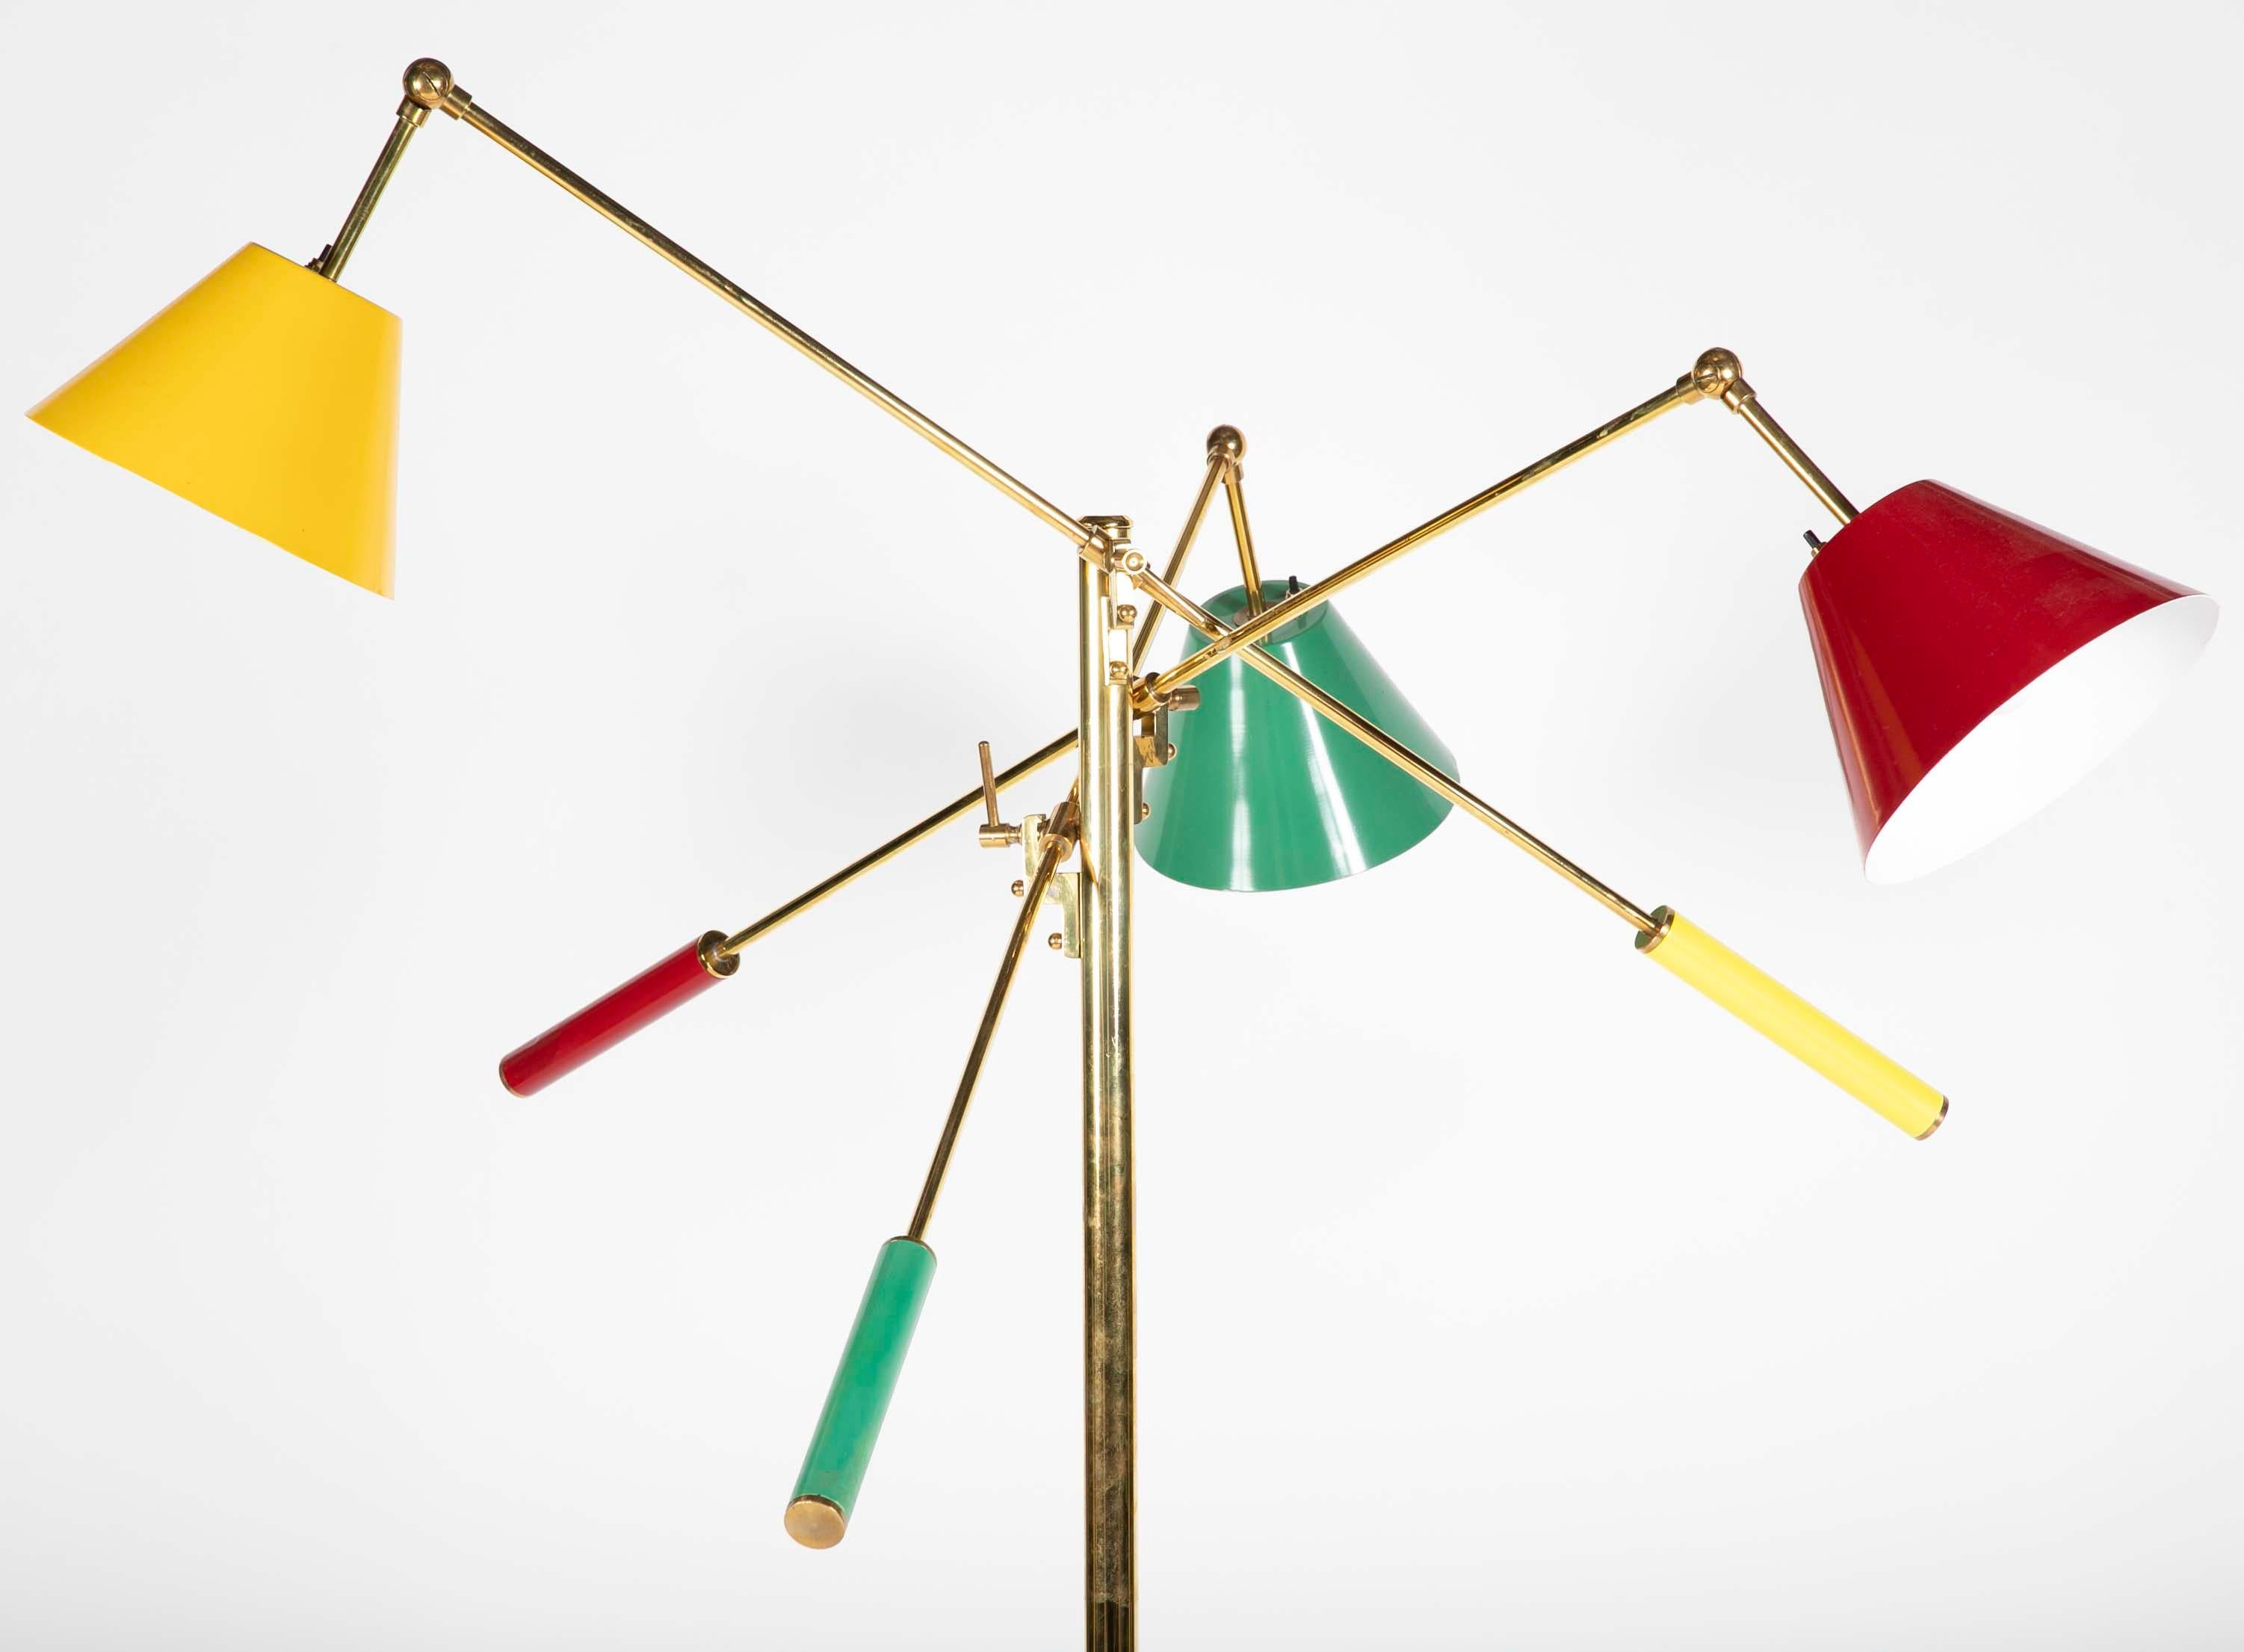 Brass Triennial Floor Lamp Attributed to Arredoluce In Good Condition For Sale In Stamford, CT